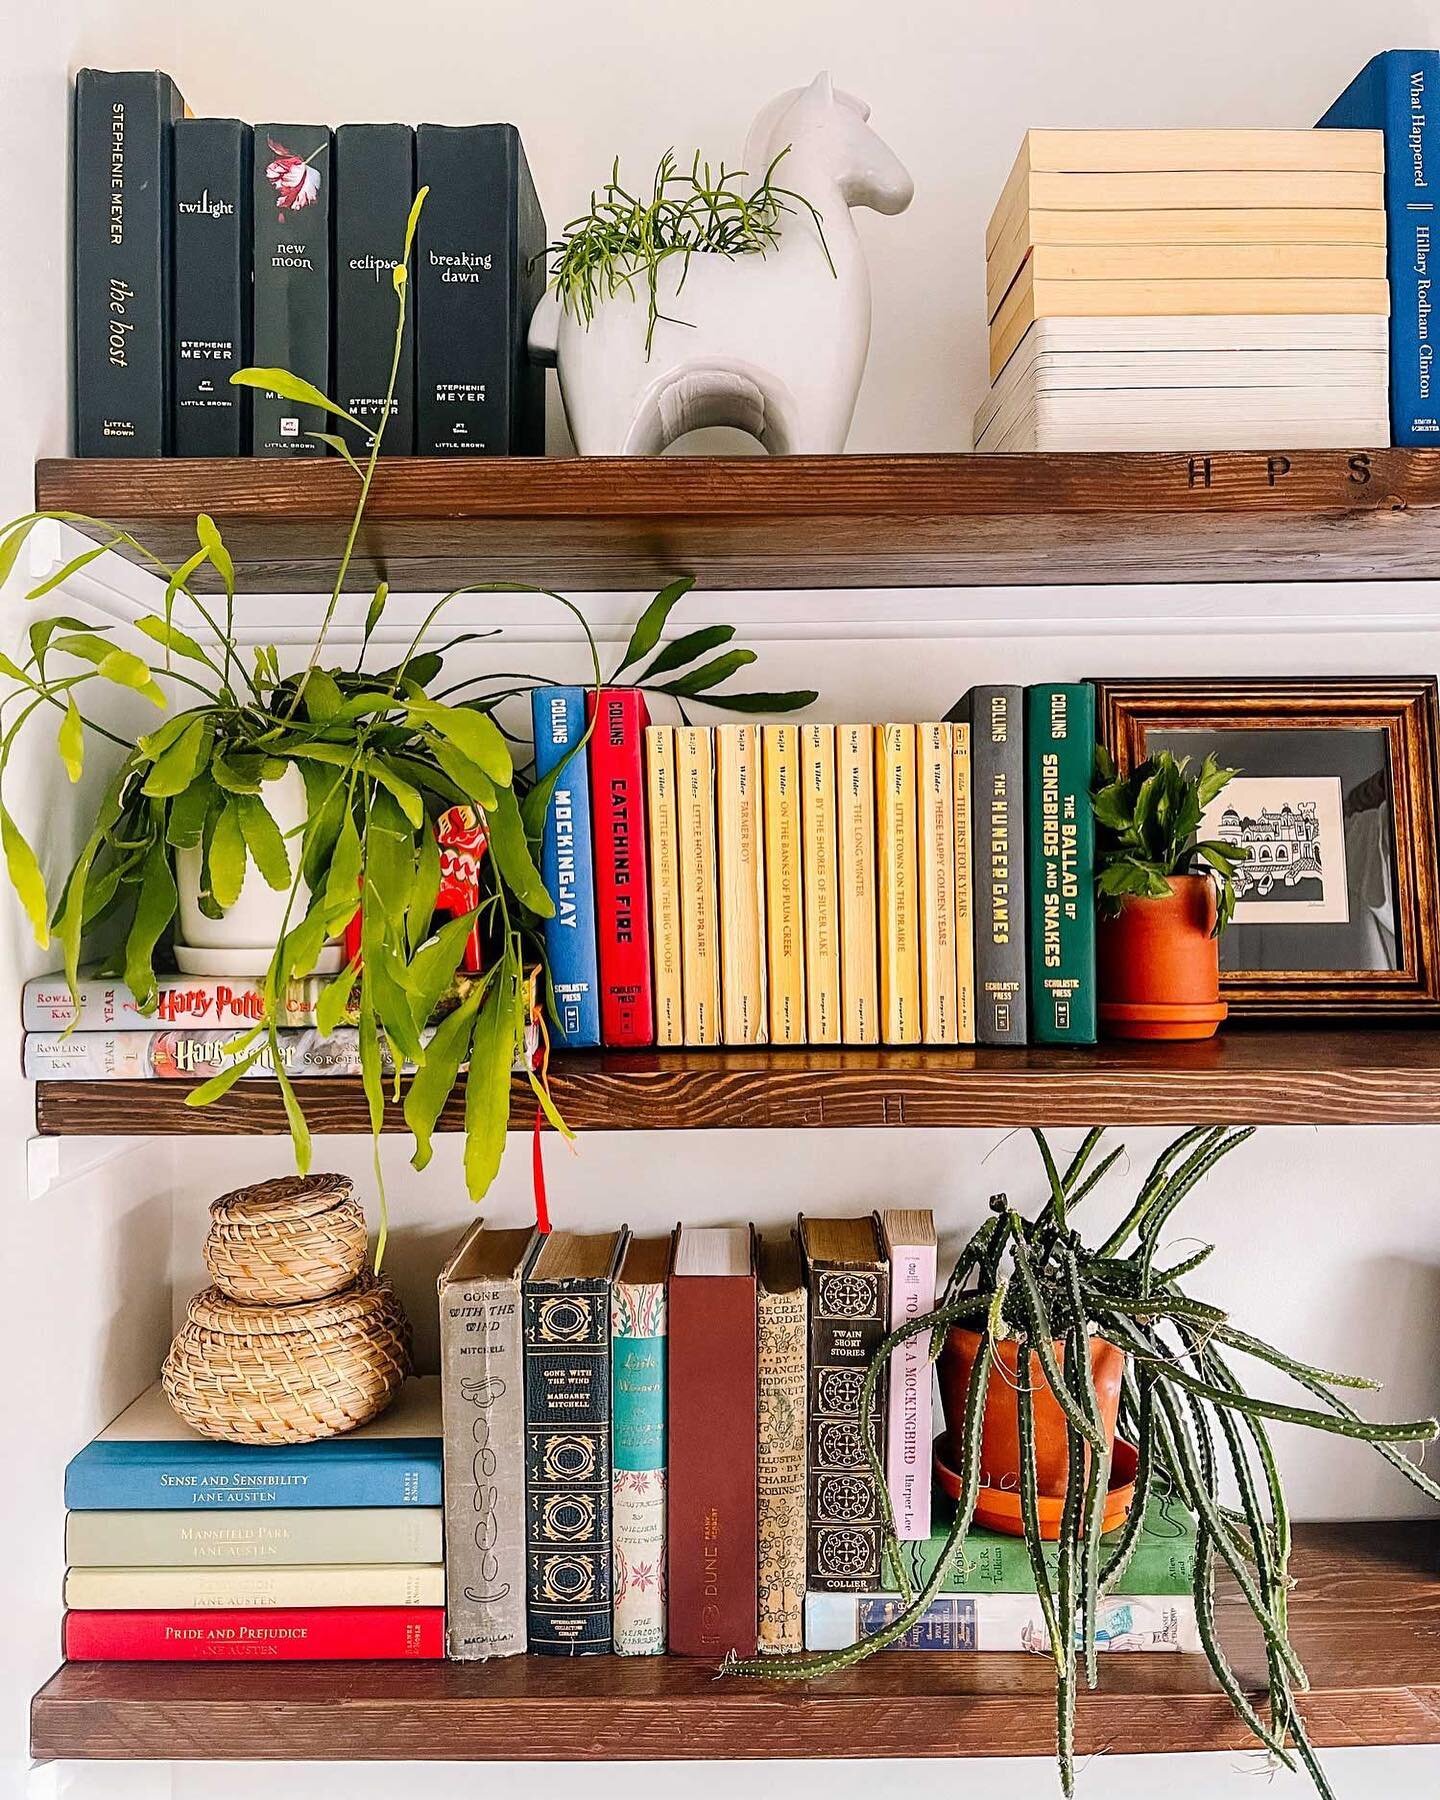 Built some shelves using reclaimed scaffolding and sprinkled all my favorite books and, of course, plants throughout. Link in bio for products and styling guide for my shelves and home office nook.